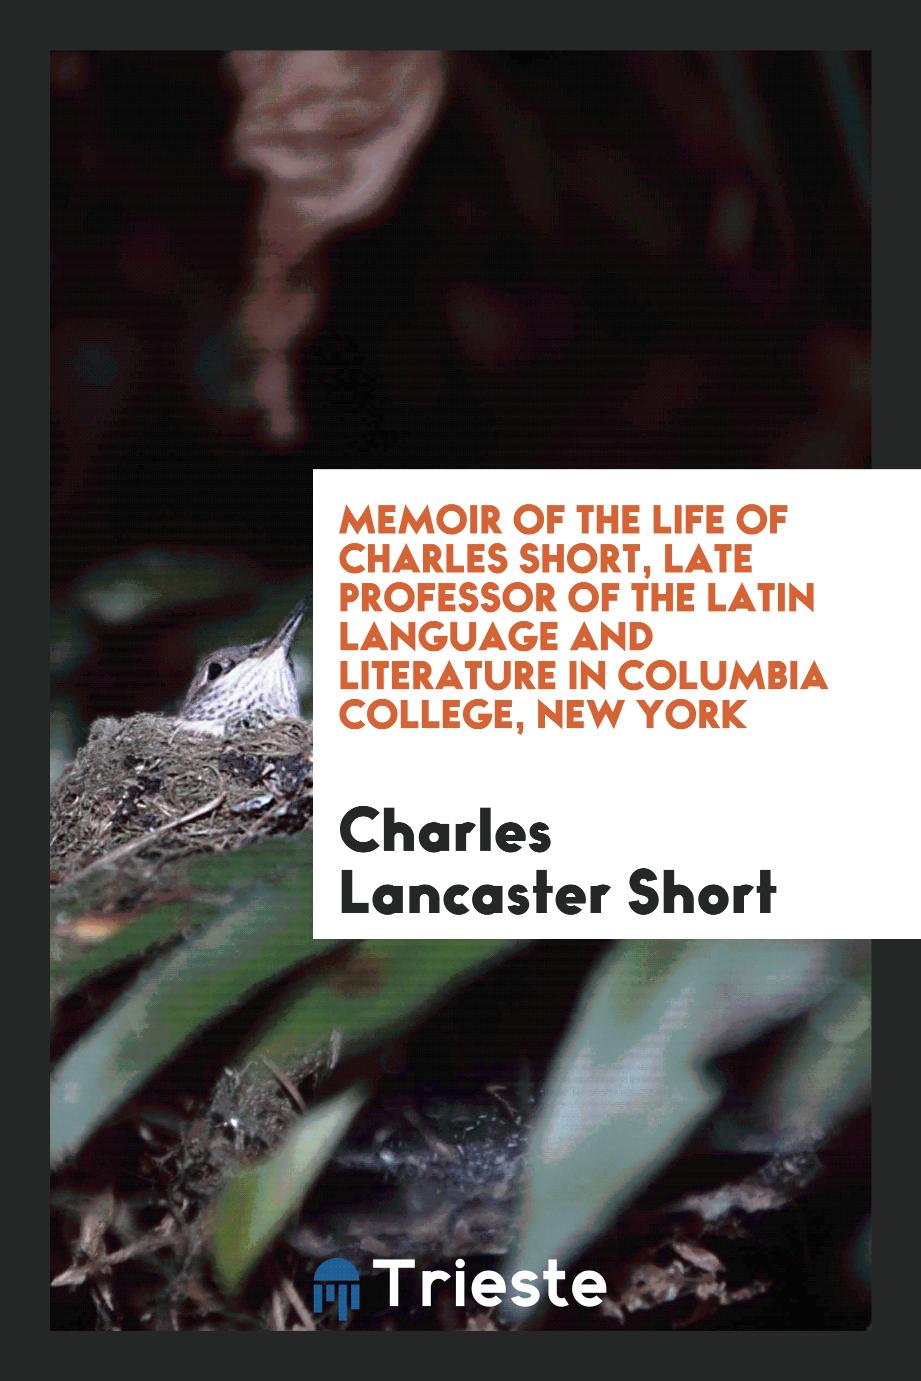 Memoir of the life of Charles Short, late professor of the Latin language and literature in Columbia college, New York